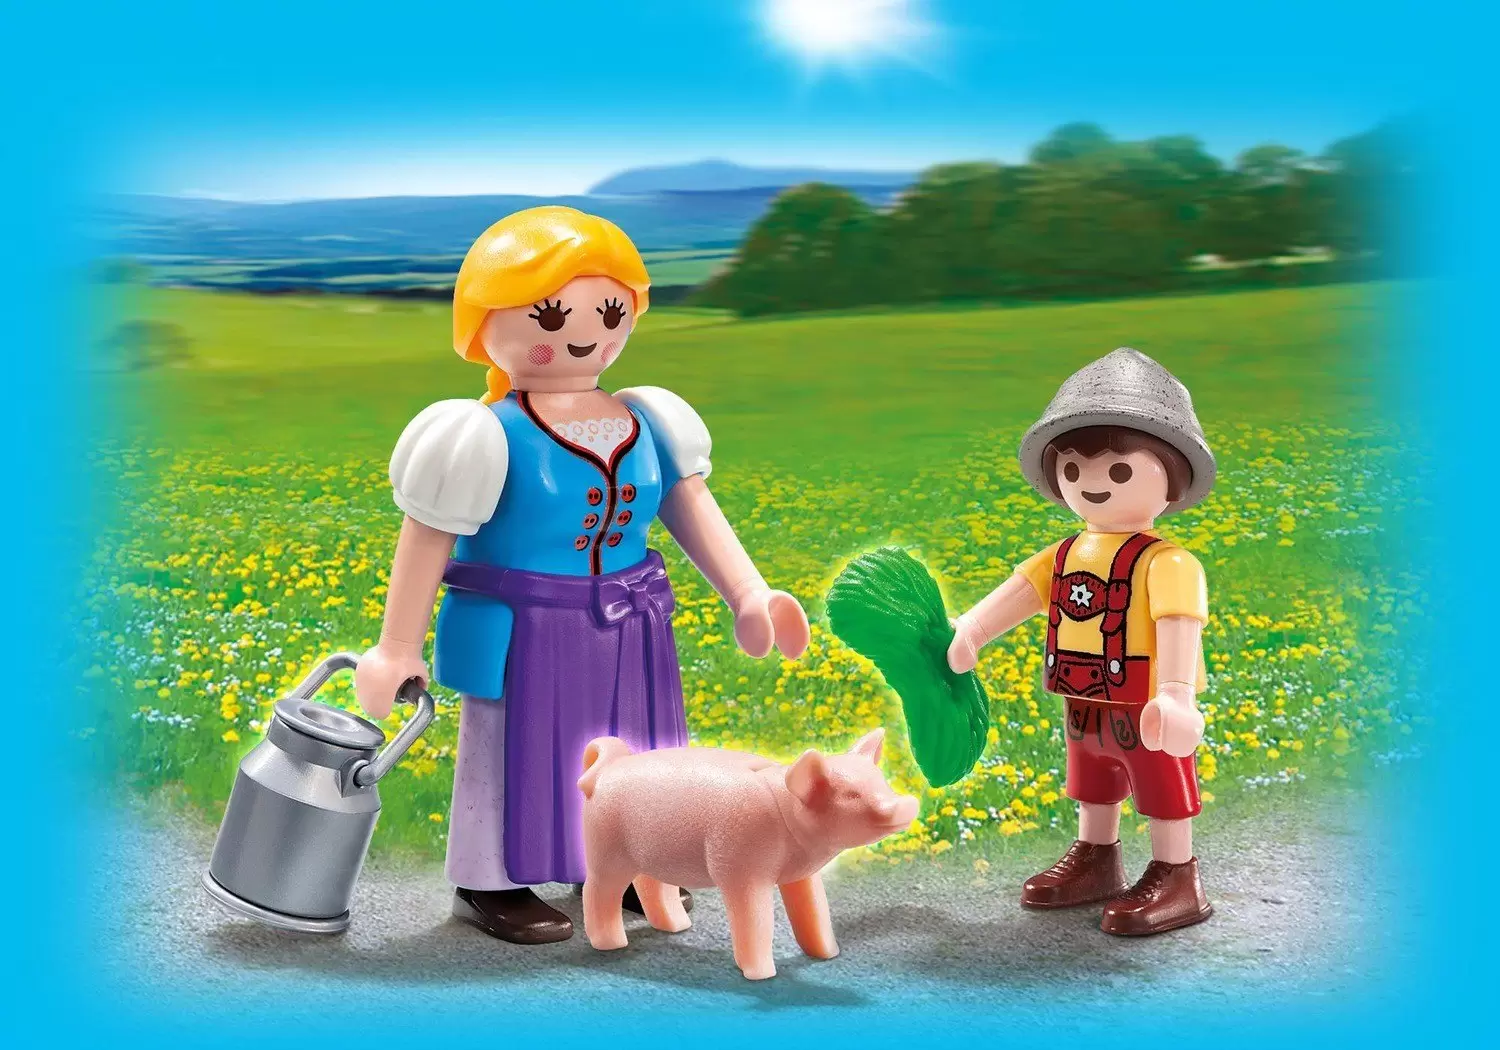 Playmobil Farmers - Country Woman and Boy Duo Pack